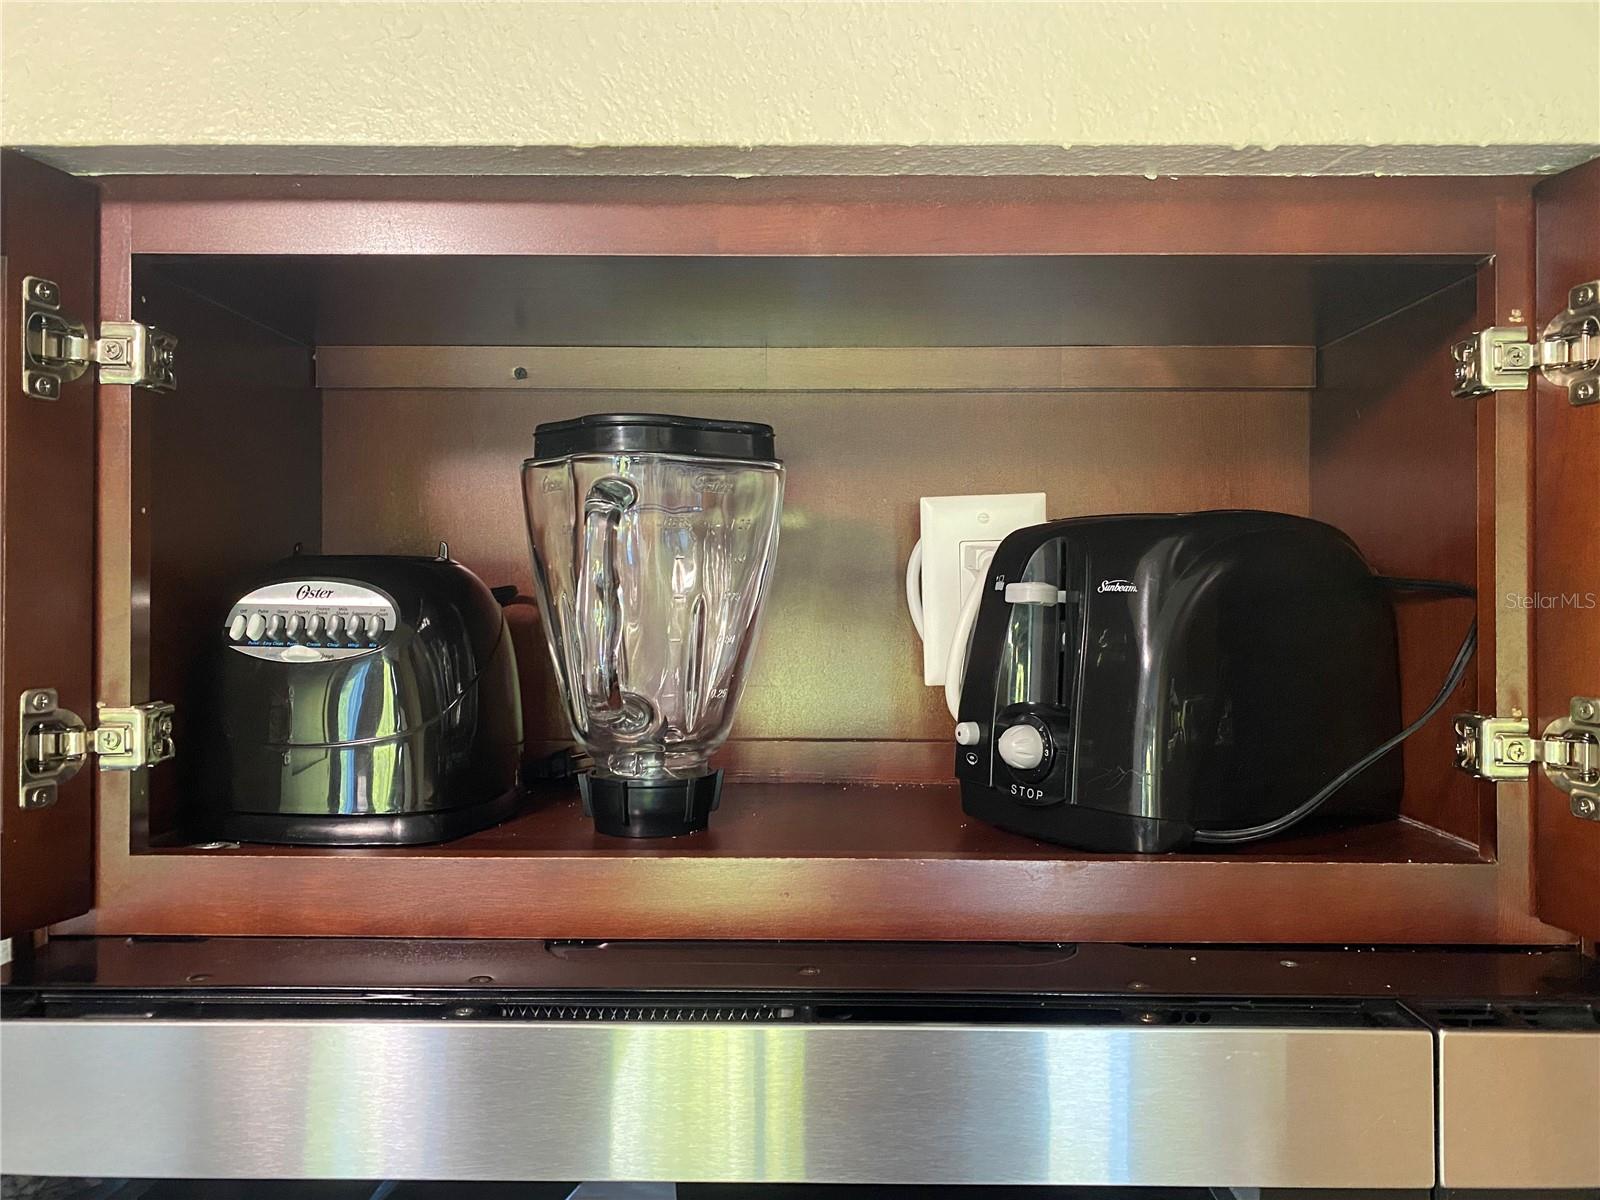 The kitchen comes with a blender and toaster